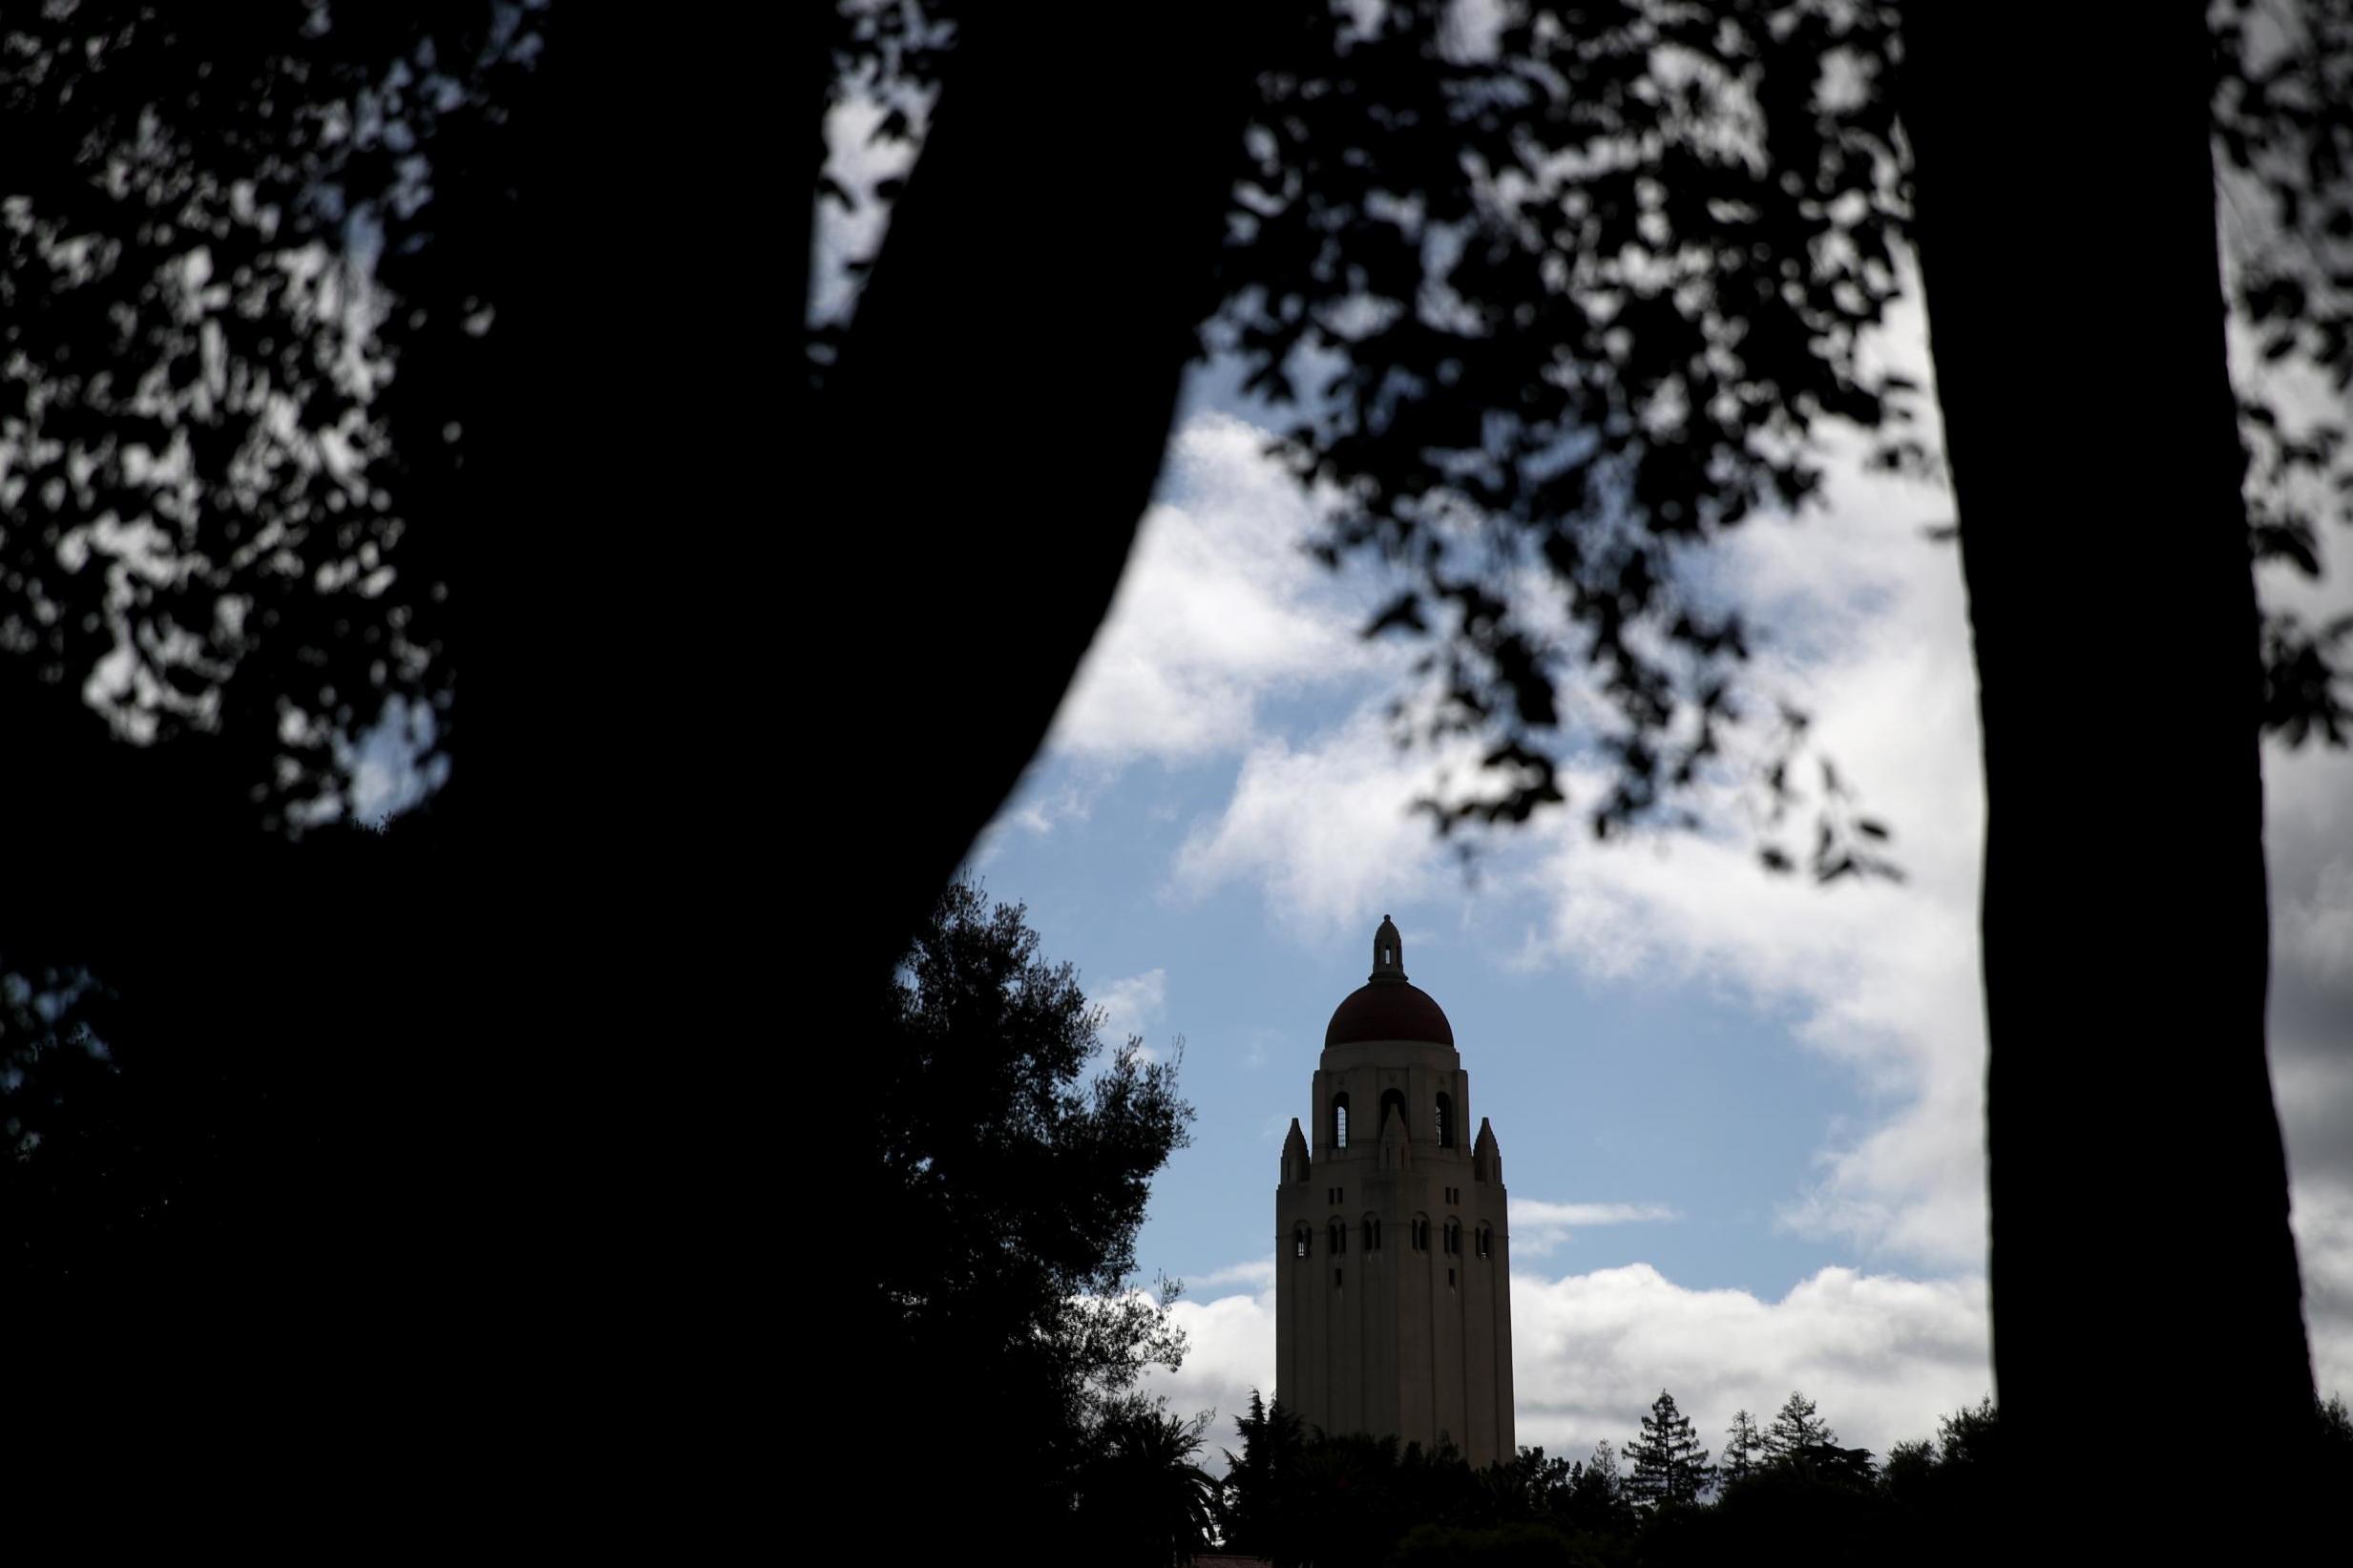 A view of Hoover Tower on the Stanford University campus on 12 March, 2019 in Stanford, California.